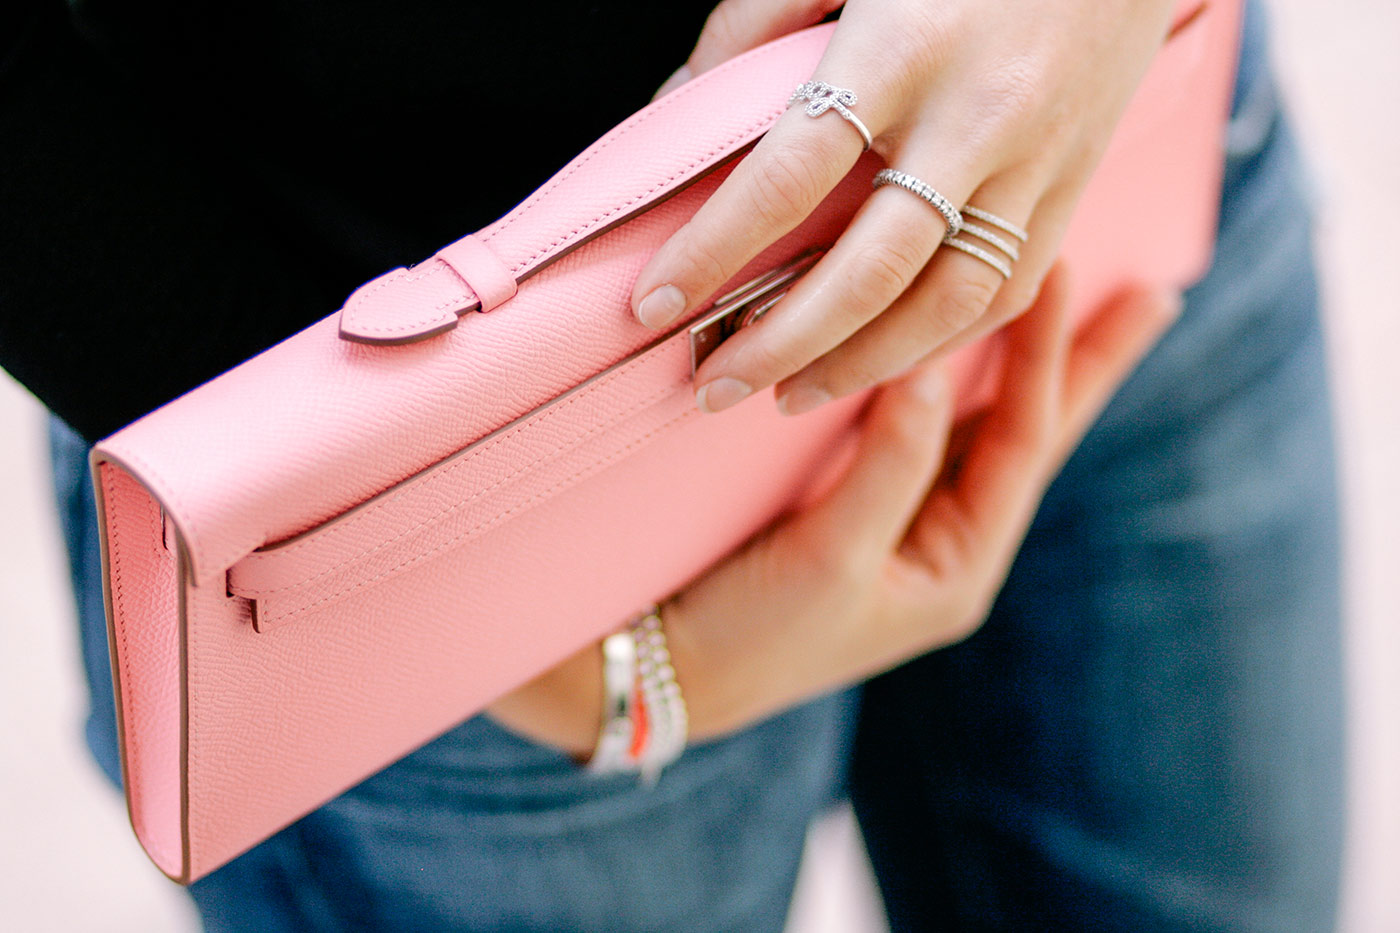 Kelly Cut Clutch by Hermès in Pink color for Luxury Clothing